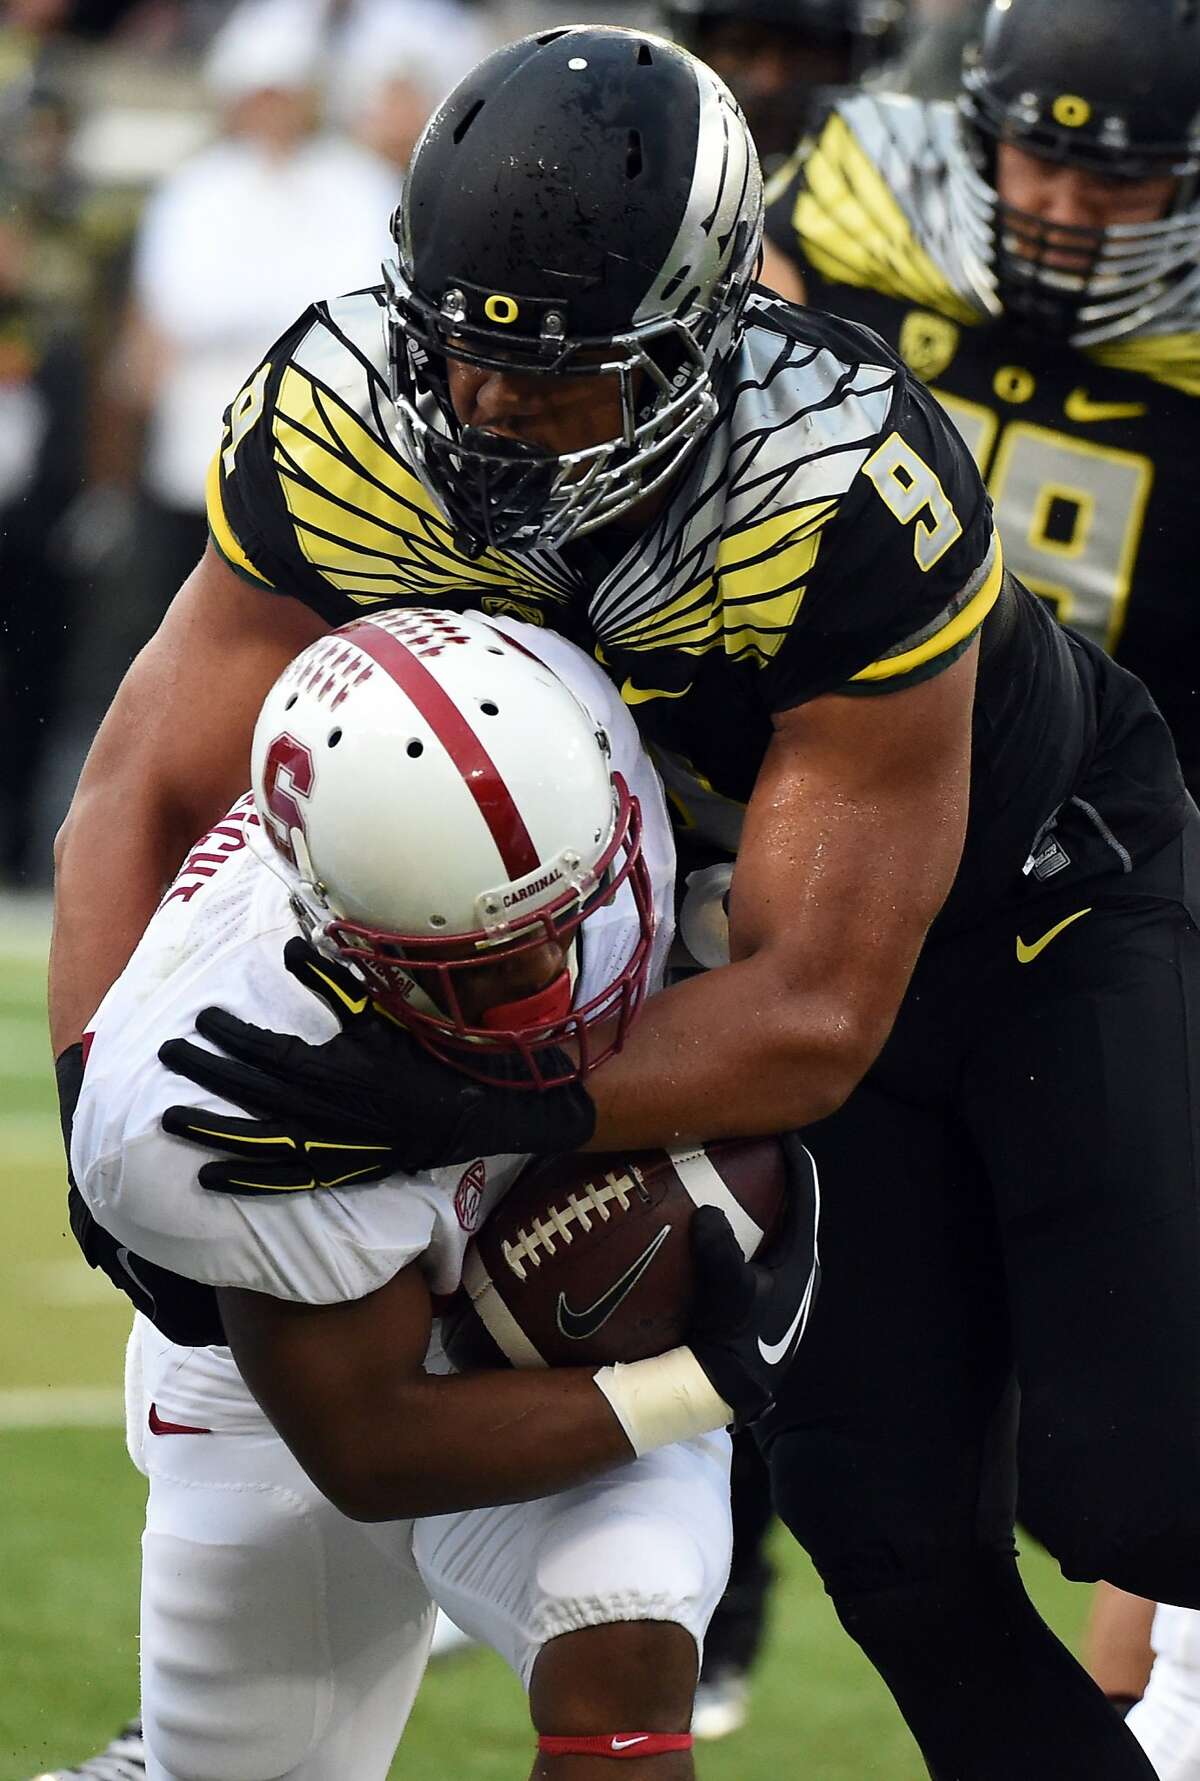 EUGENE, OR - NOVEMBER 1: Defensive lineman Arik Armstead #9 of the Oregon Ducks tackles running back Remound Wright #22 of the Stanford Cardinal during the first half of the game at Autzen Stadium on November 1, 2014 in Eugene, Oregon. (Photo by Steve Dykes/Getty Images)